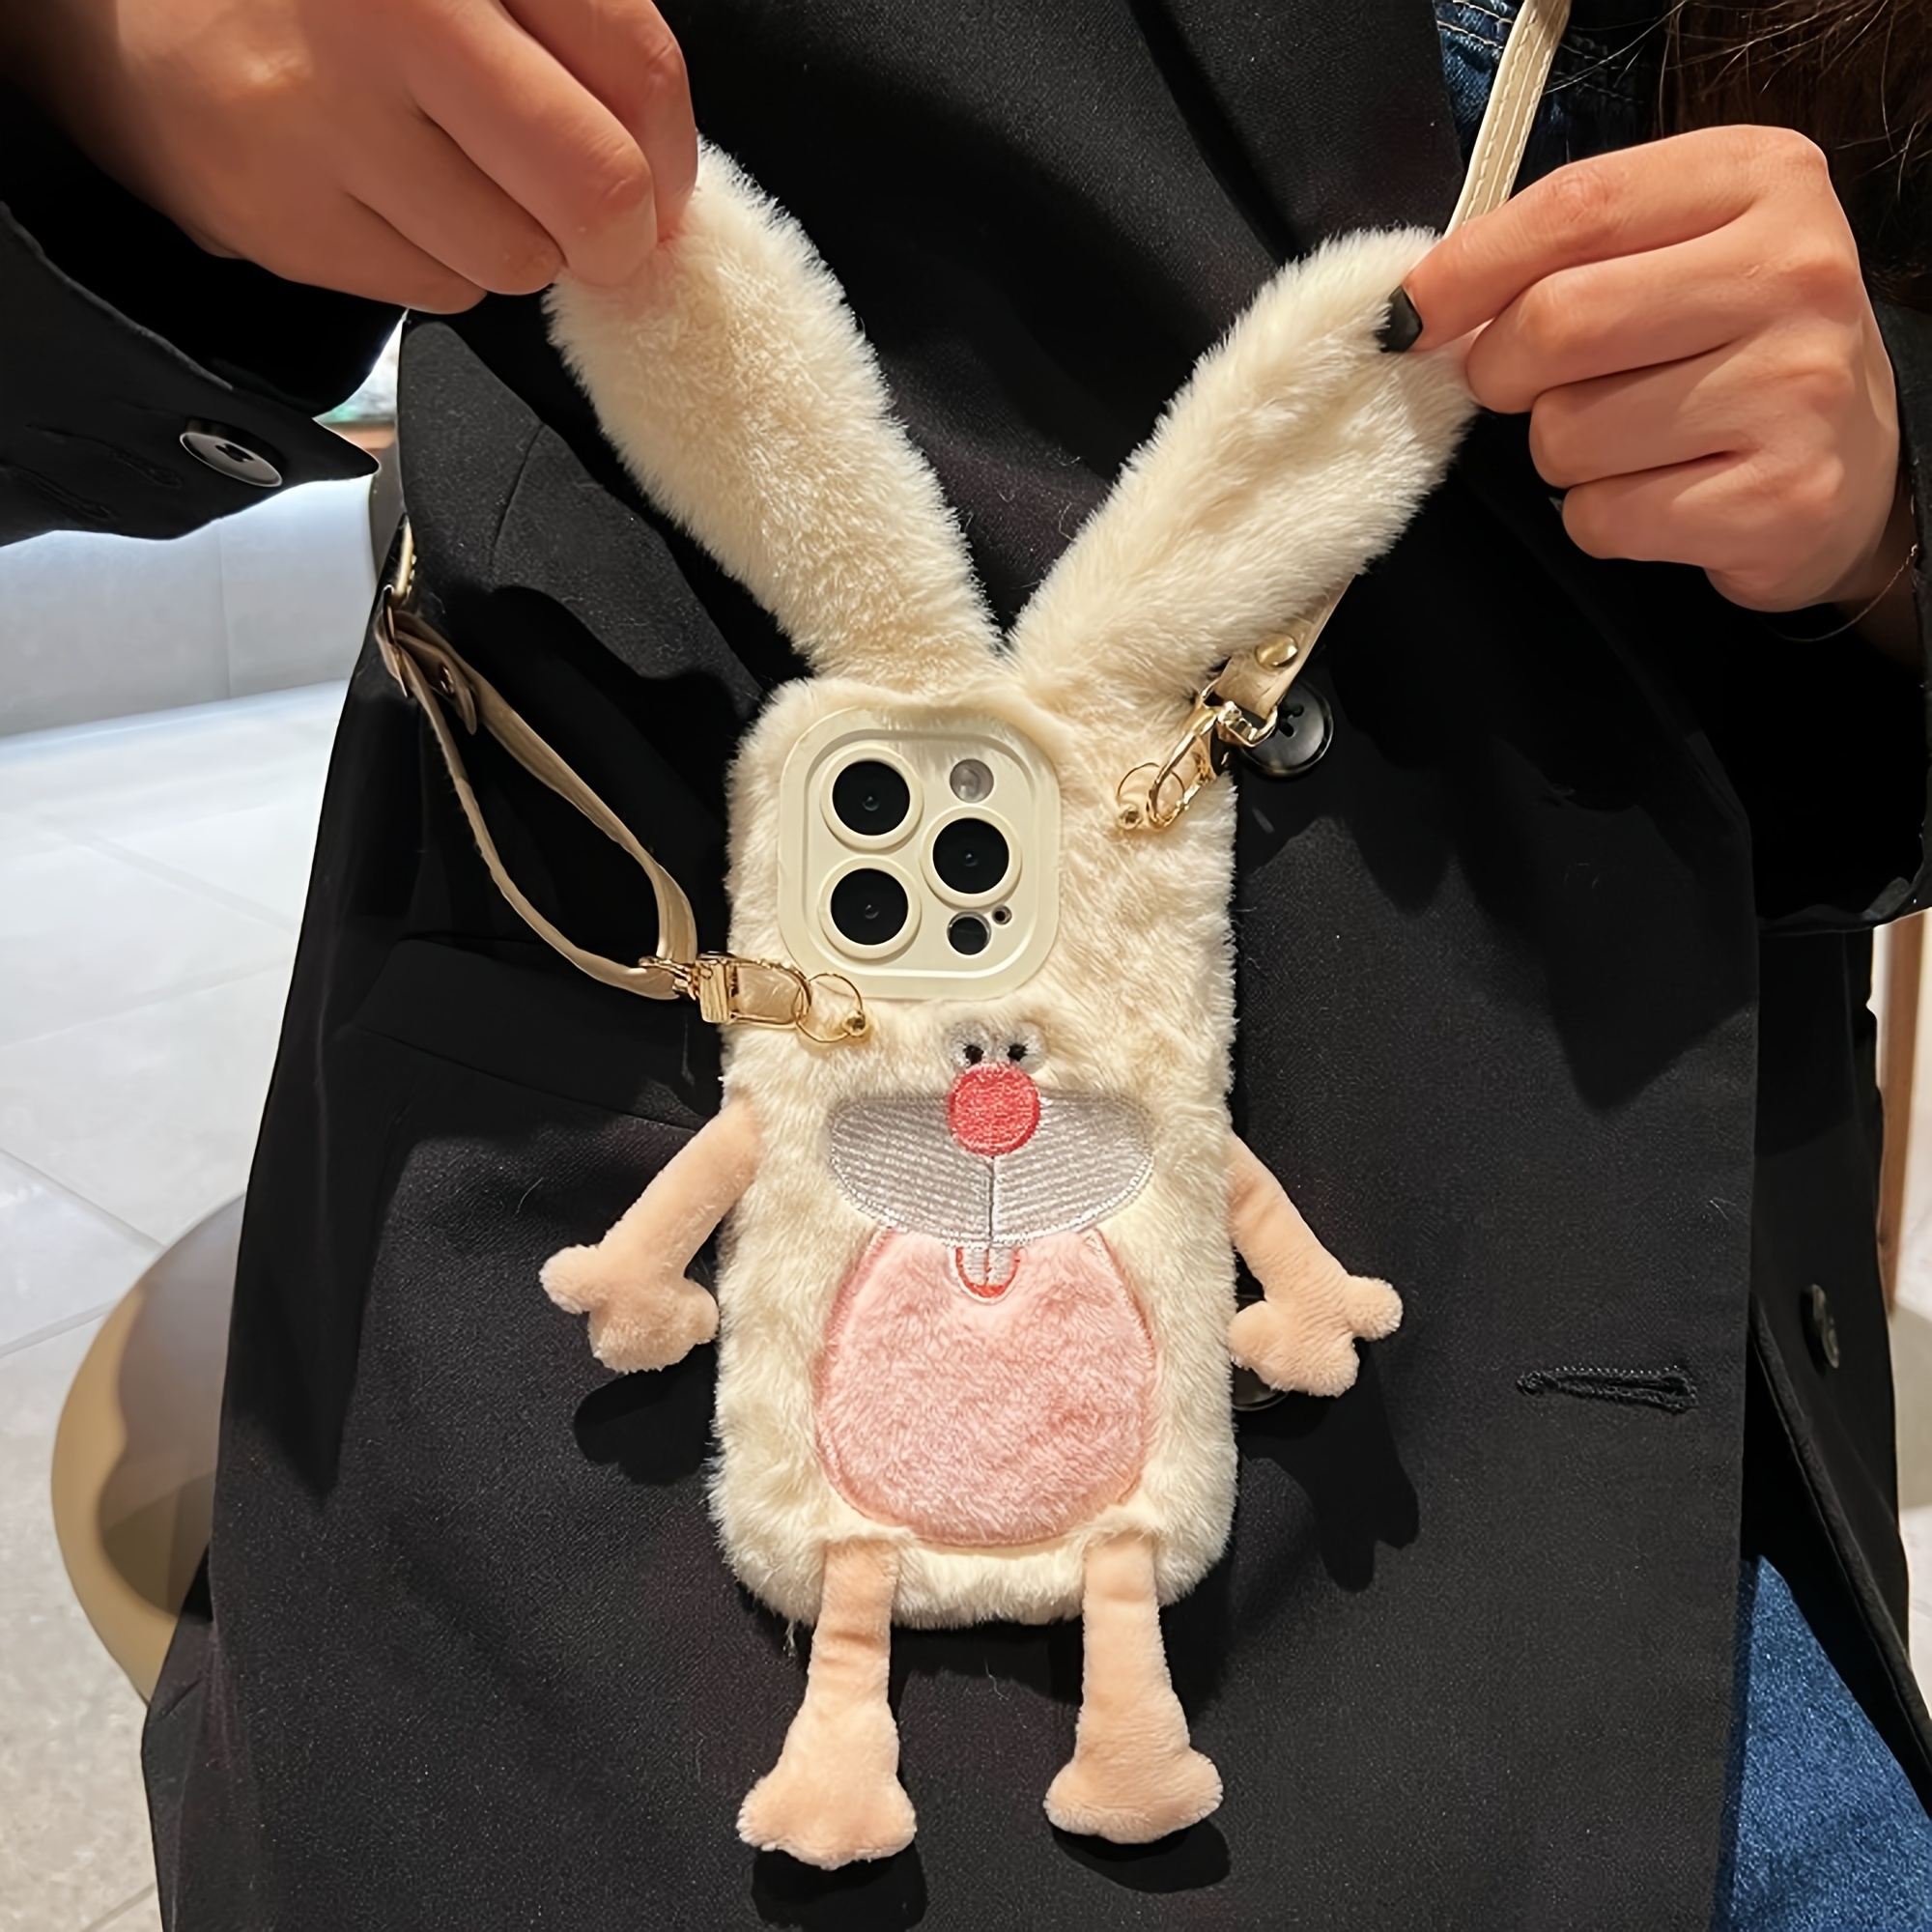 

Cute Bunny Plush Tpu Phone Case With Lanyard For 14 Pro Max/14 Pro/14, 15 Pro Max/15 Pro/15, 13 Pro Max/13 Pro, 11/12, Fashionable Protective Soft Case For Women